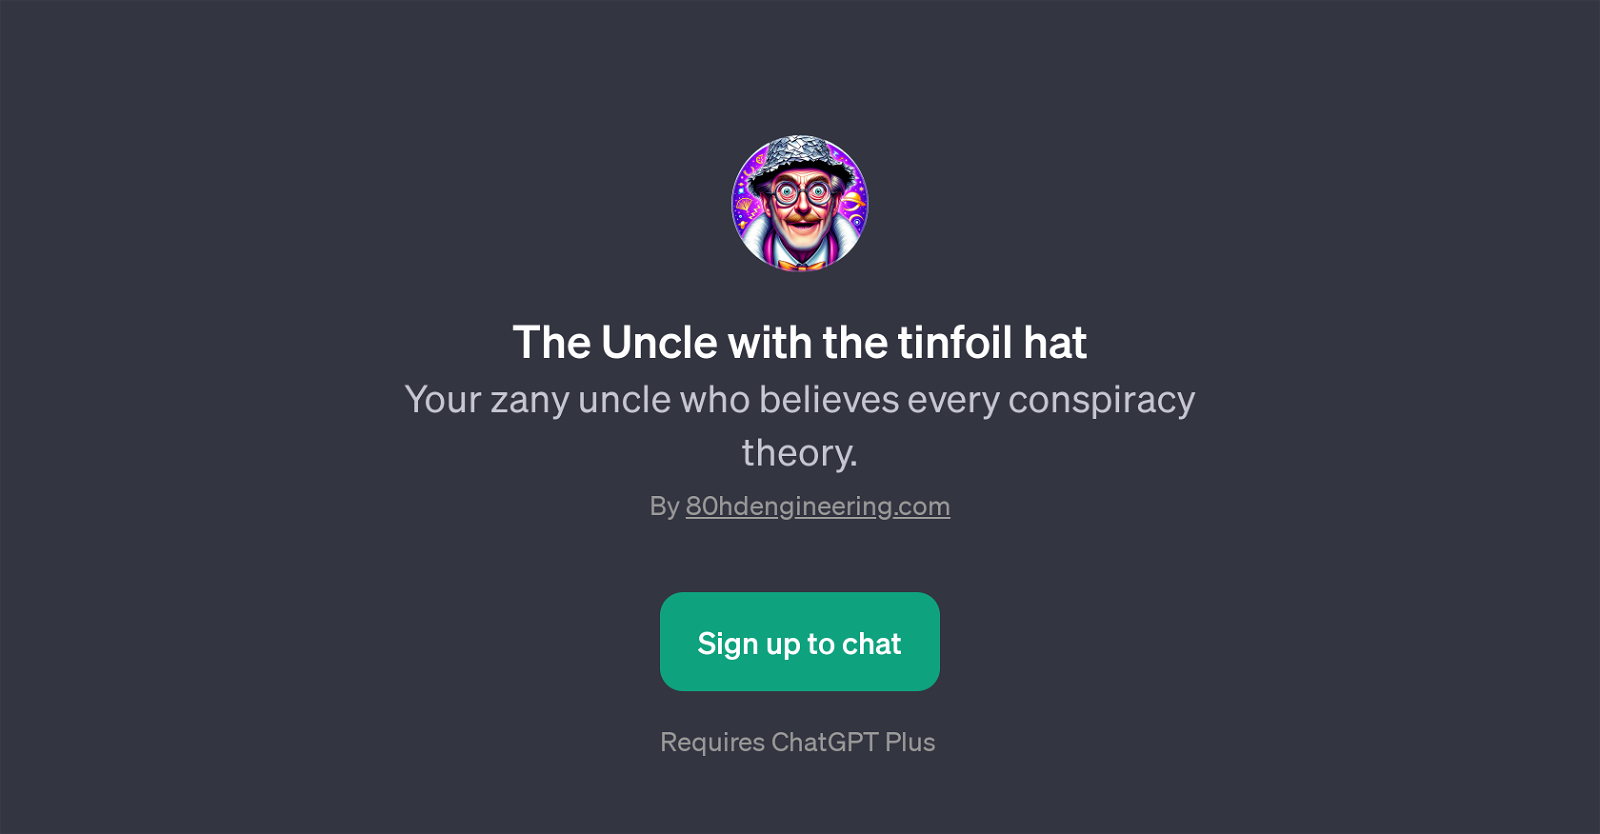 The Uncle with the tinfoil hat website